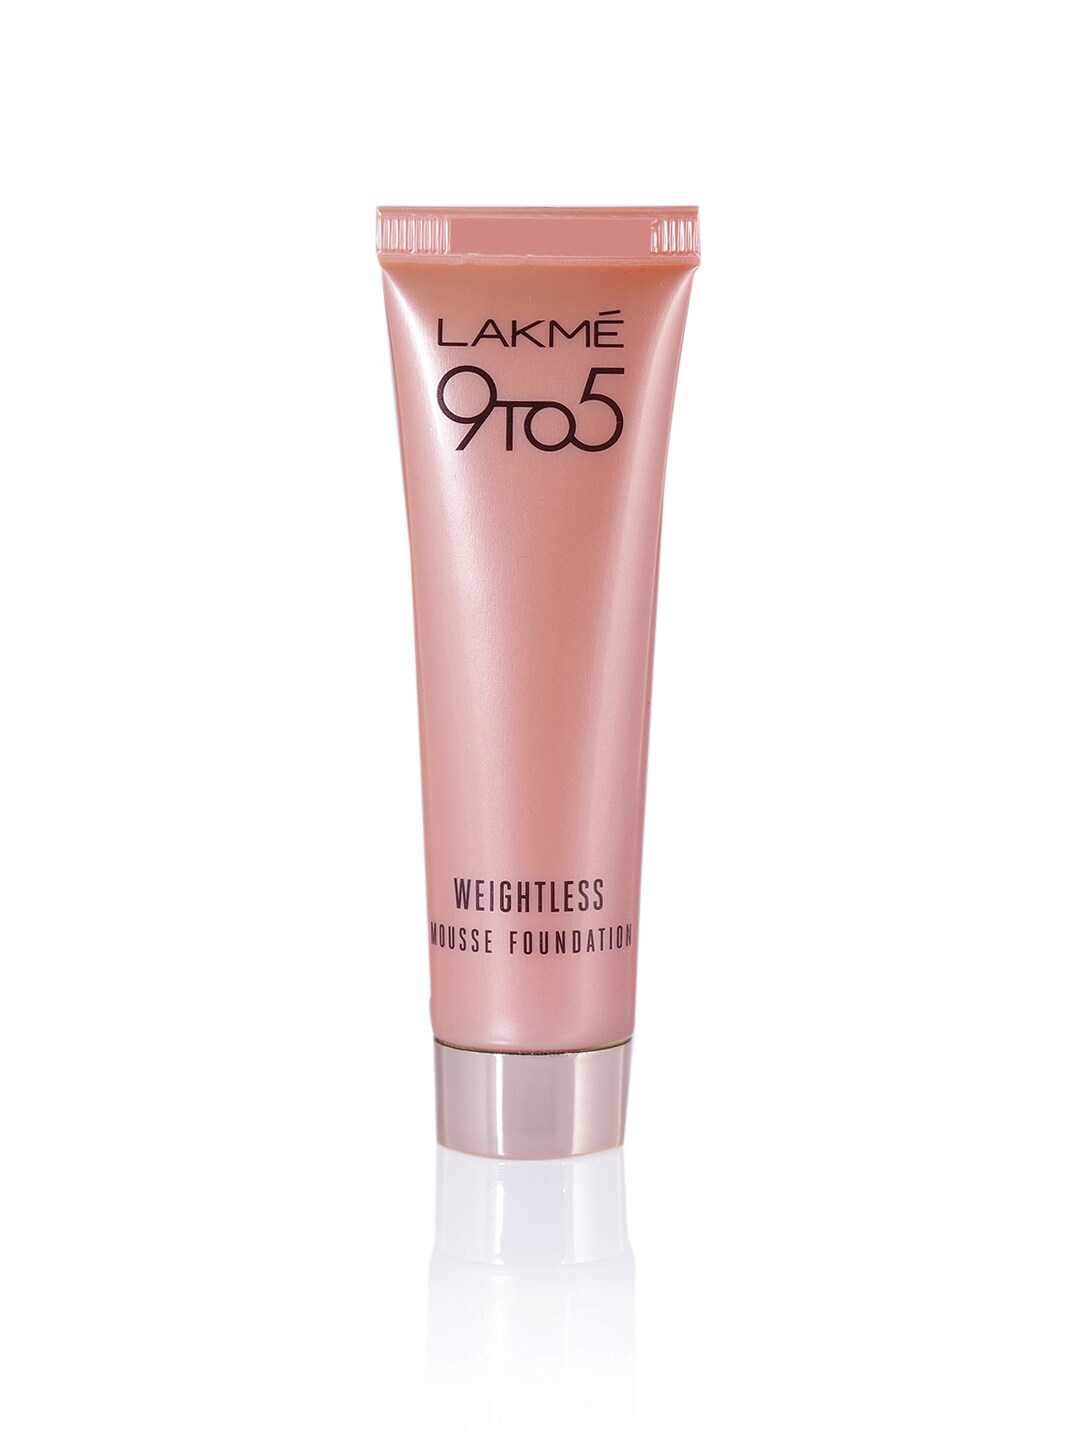 Lakme 9to5 Weightless Mousse Foundation - Toffee 25g Price in India